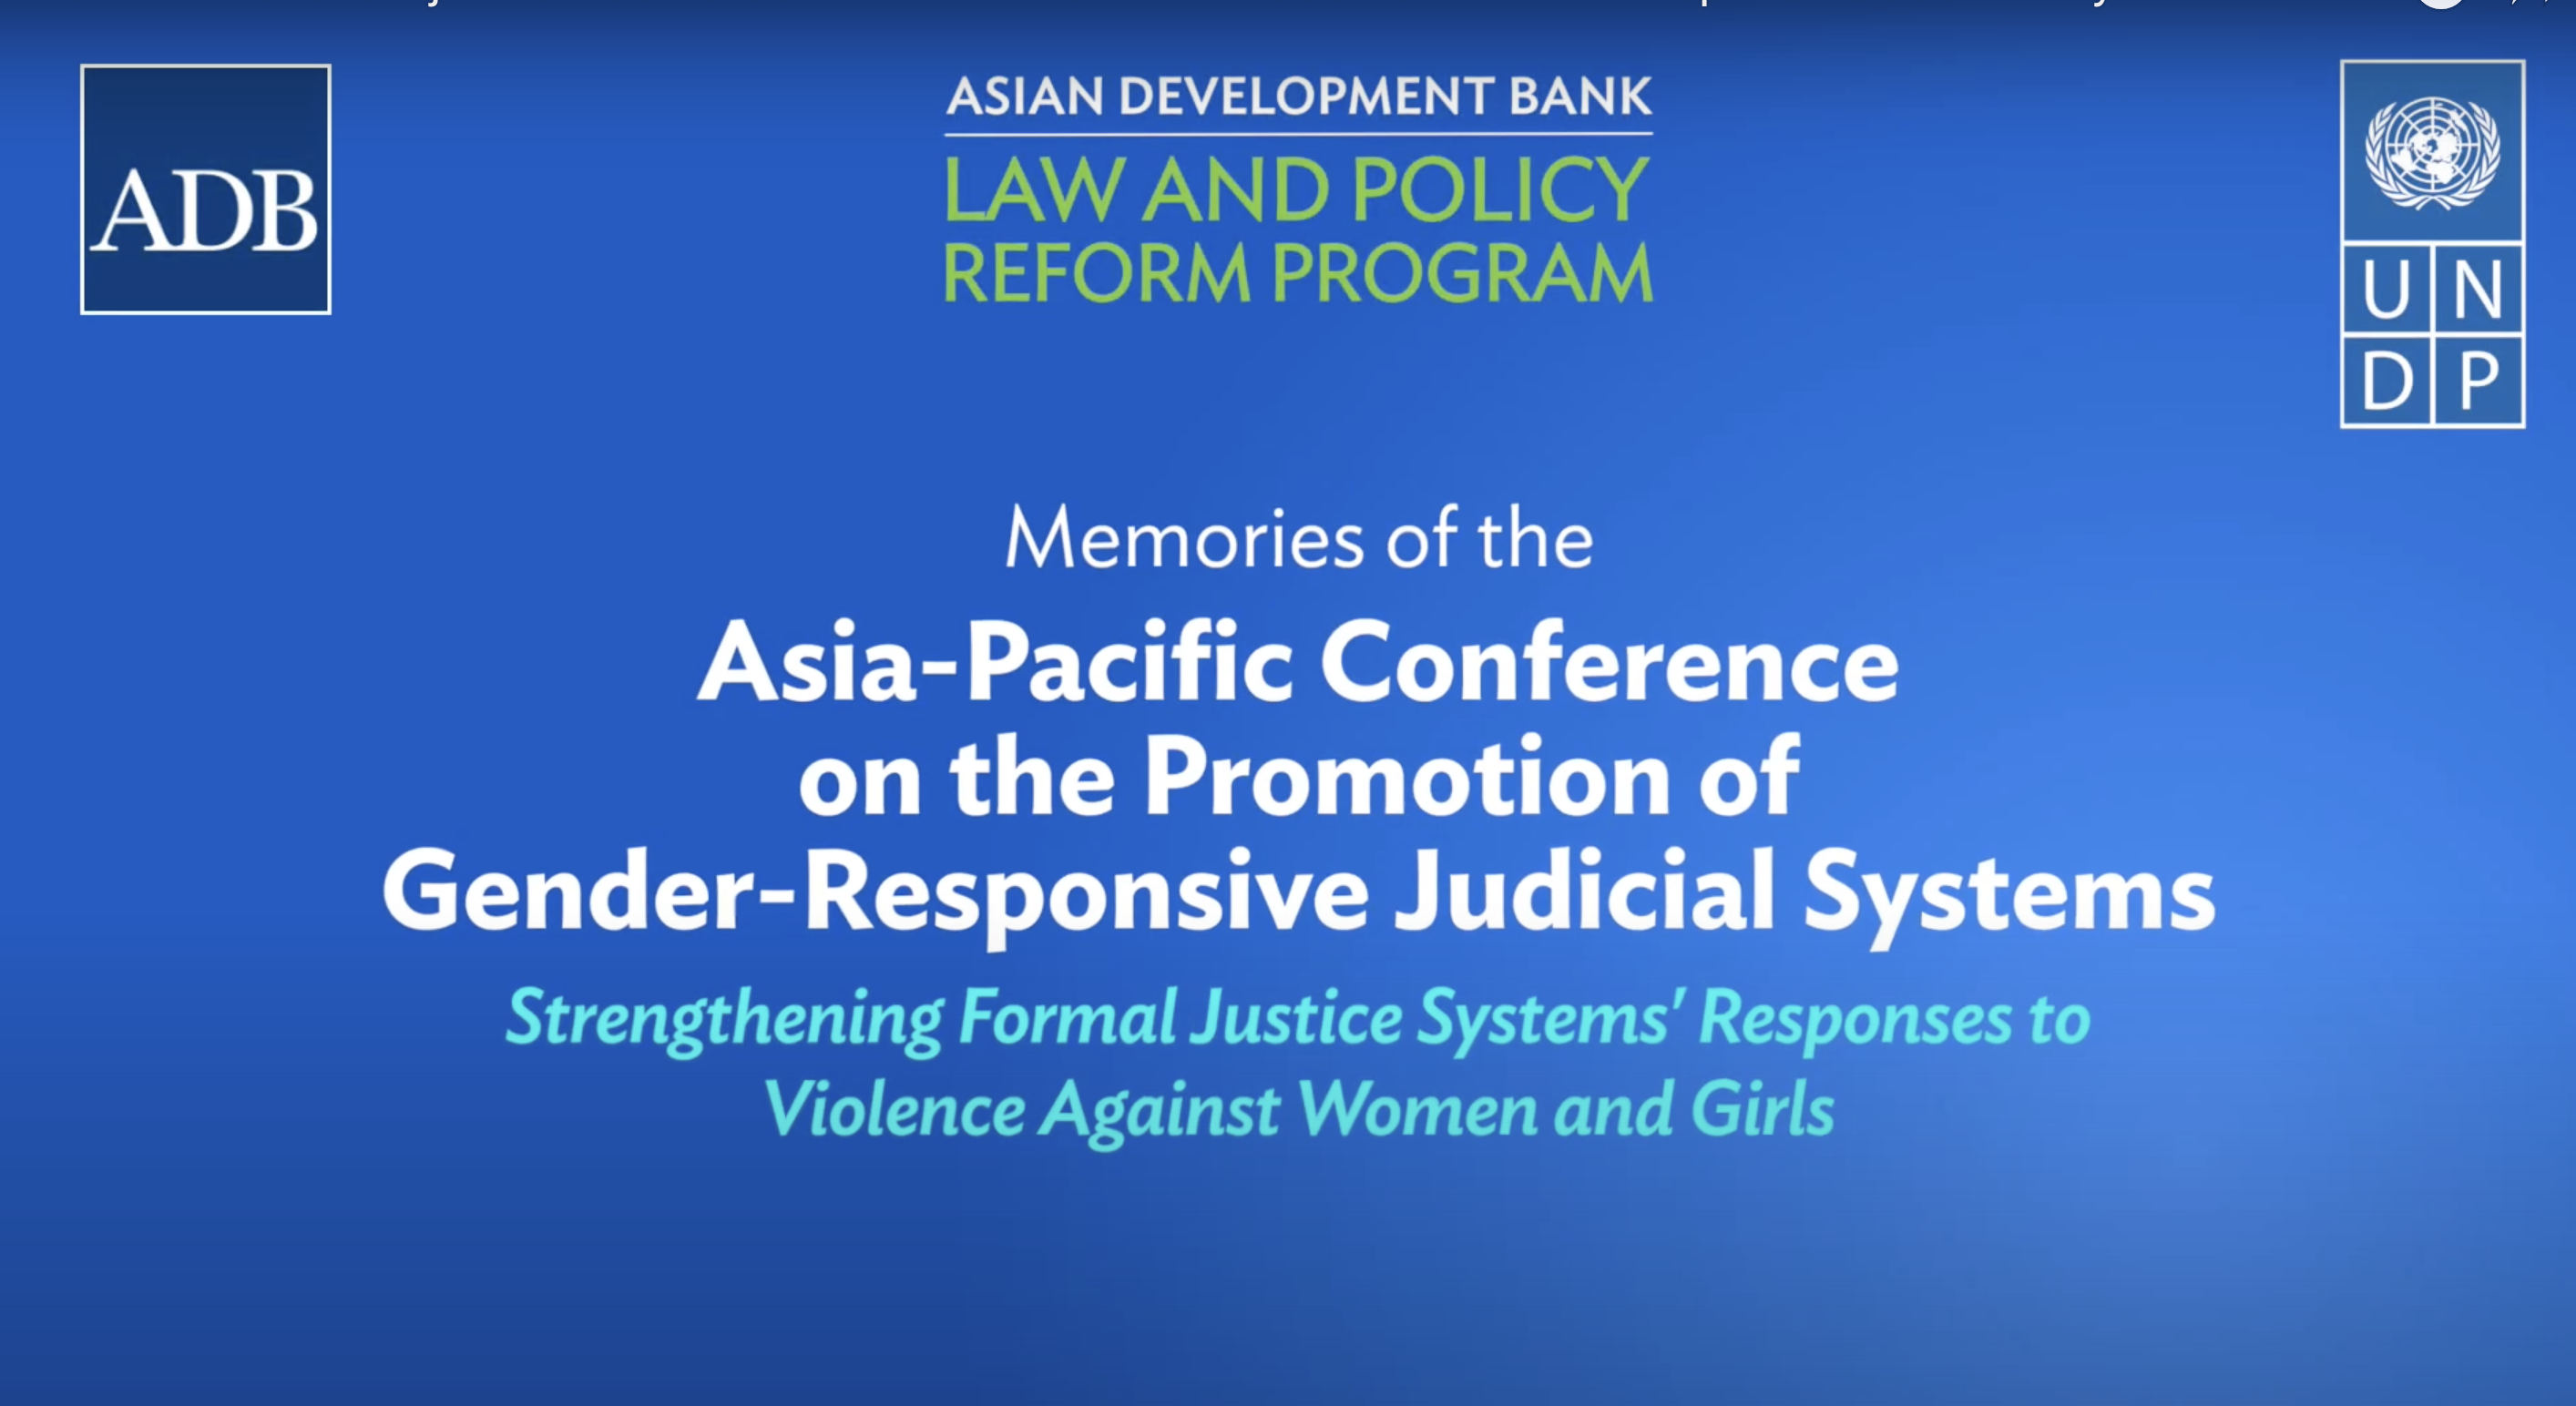 Video: Memories of the Fiji Asia-Pacific Conference on the Promotion of Gender-Responsive Judicial Systems